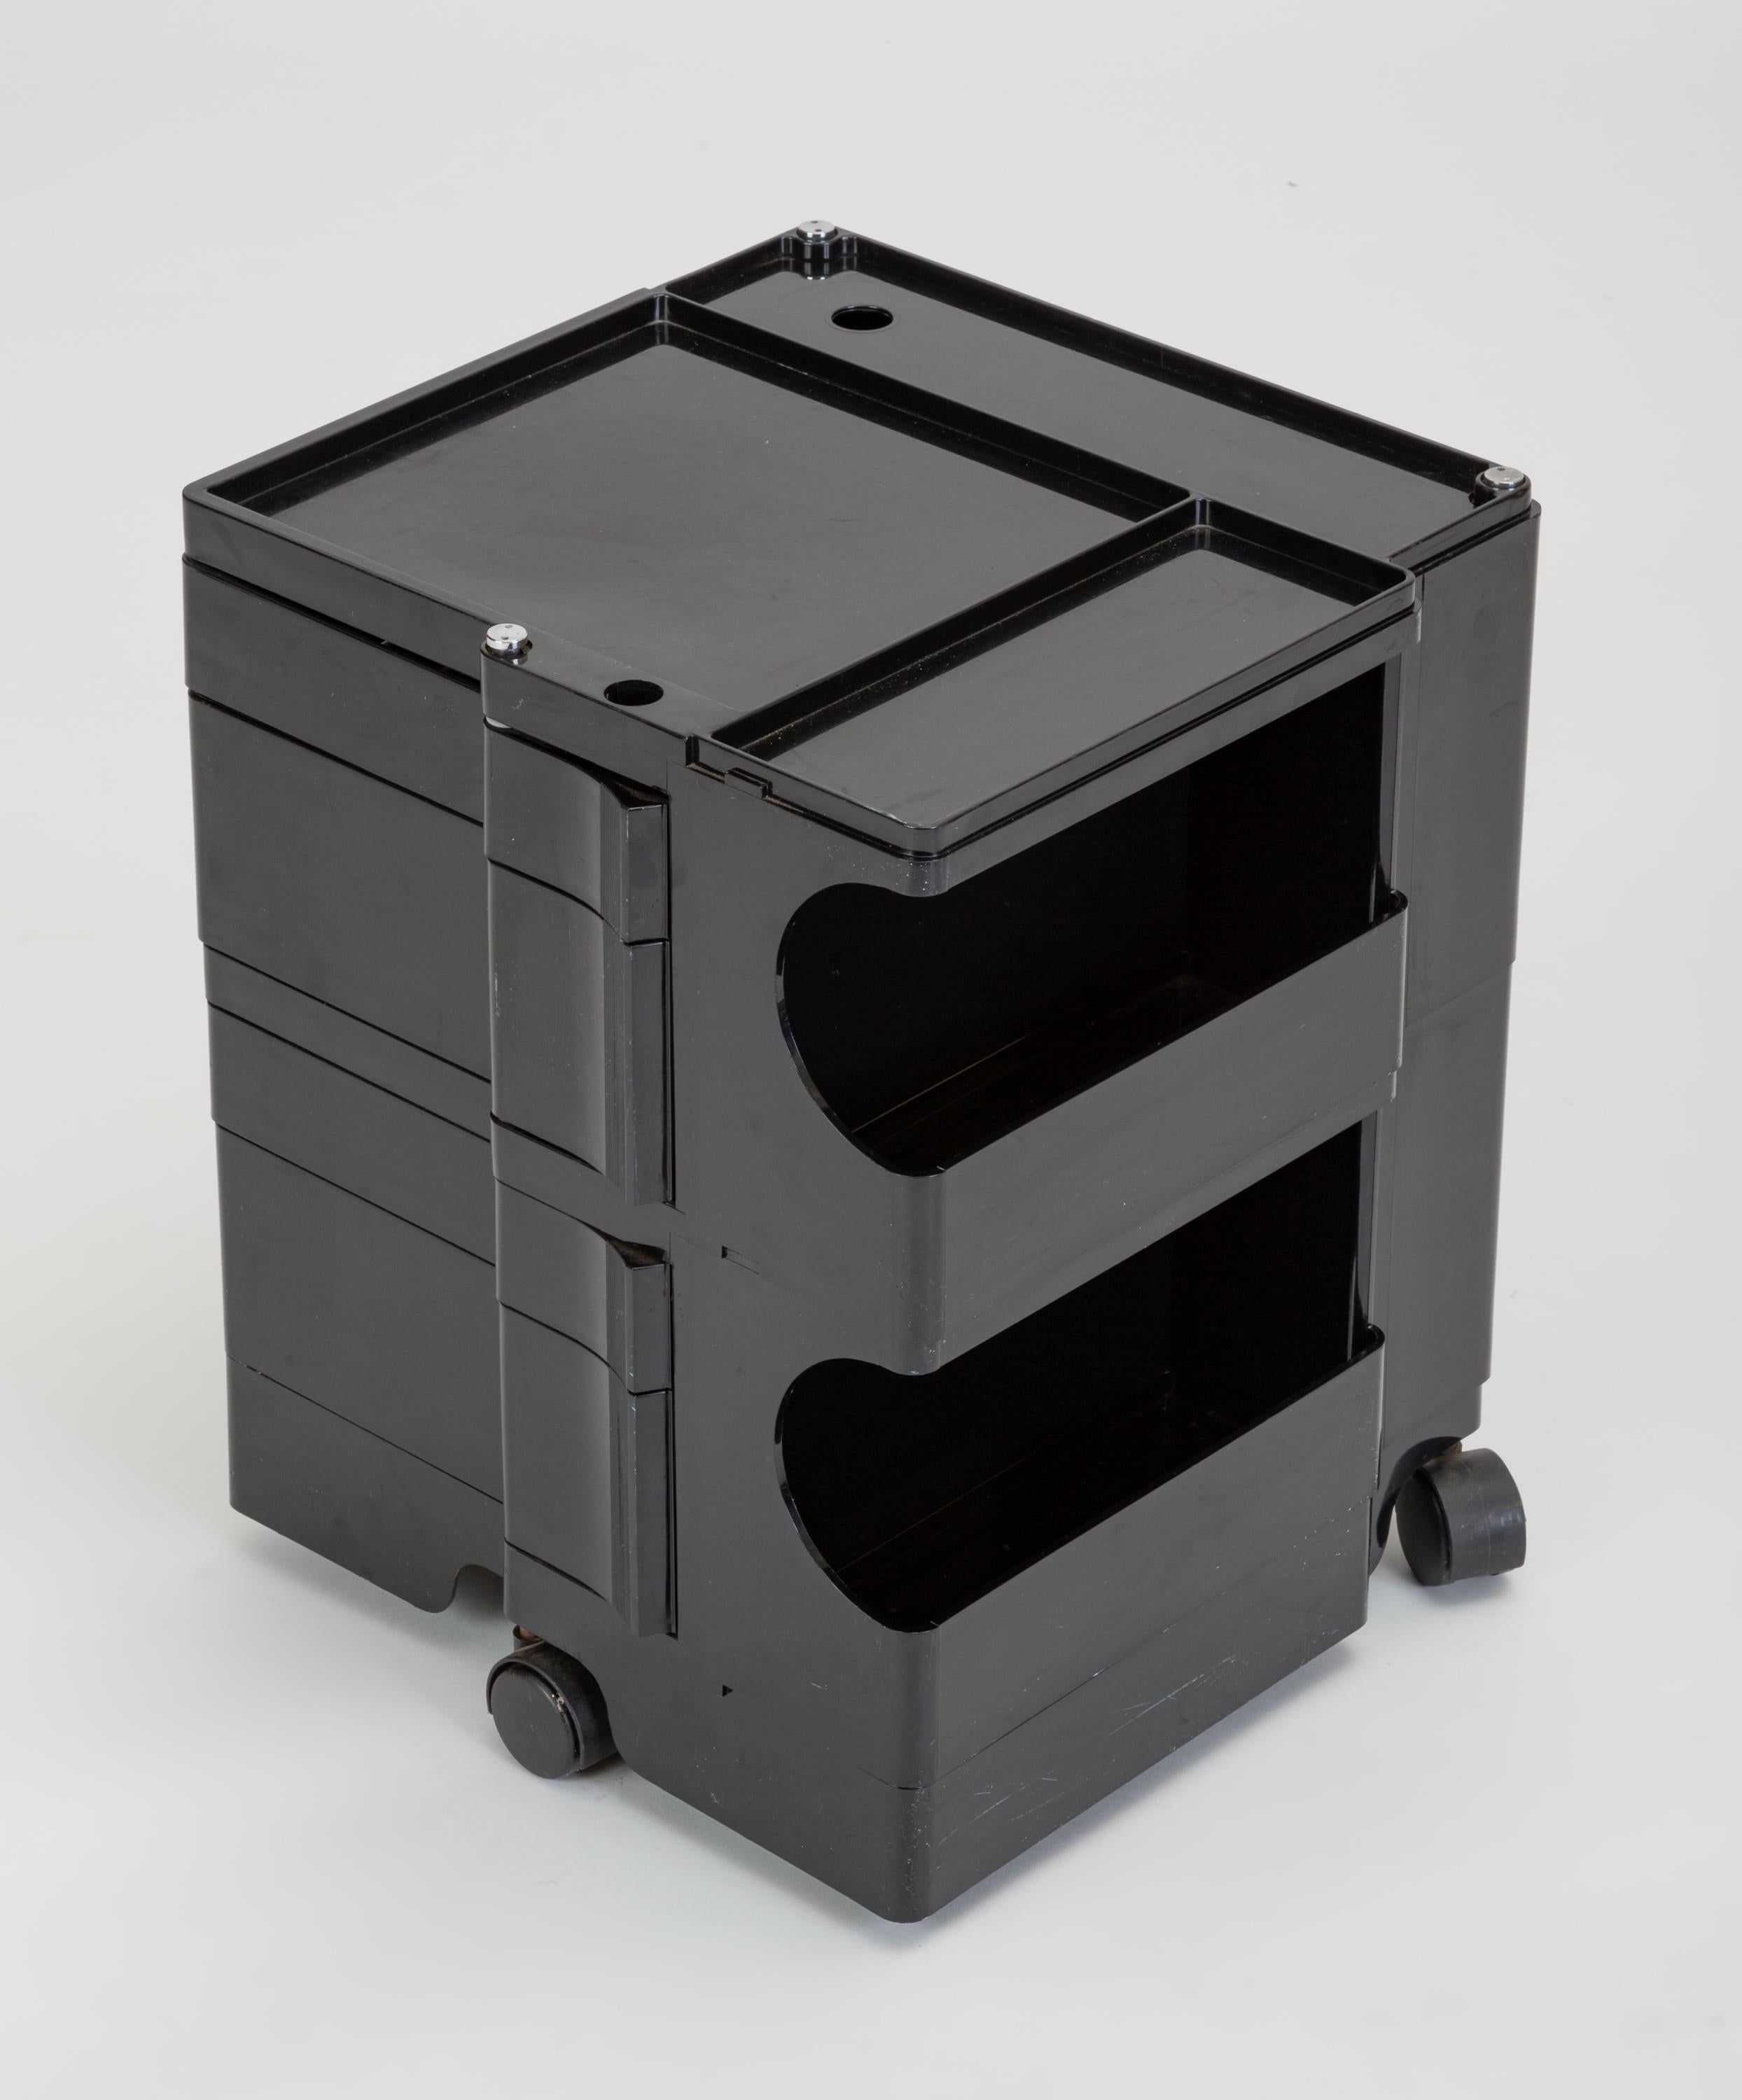 Designed in 1969, the Boby Cart by Joe Colombo was originally conceived as an organizational tool for architects and draftsman. Capitalizing on its modular capabilities, Padova-based Bieffeplast put the trolley into production, offering consumers